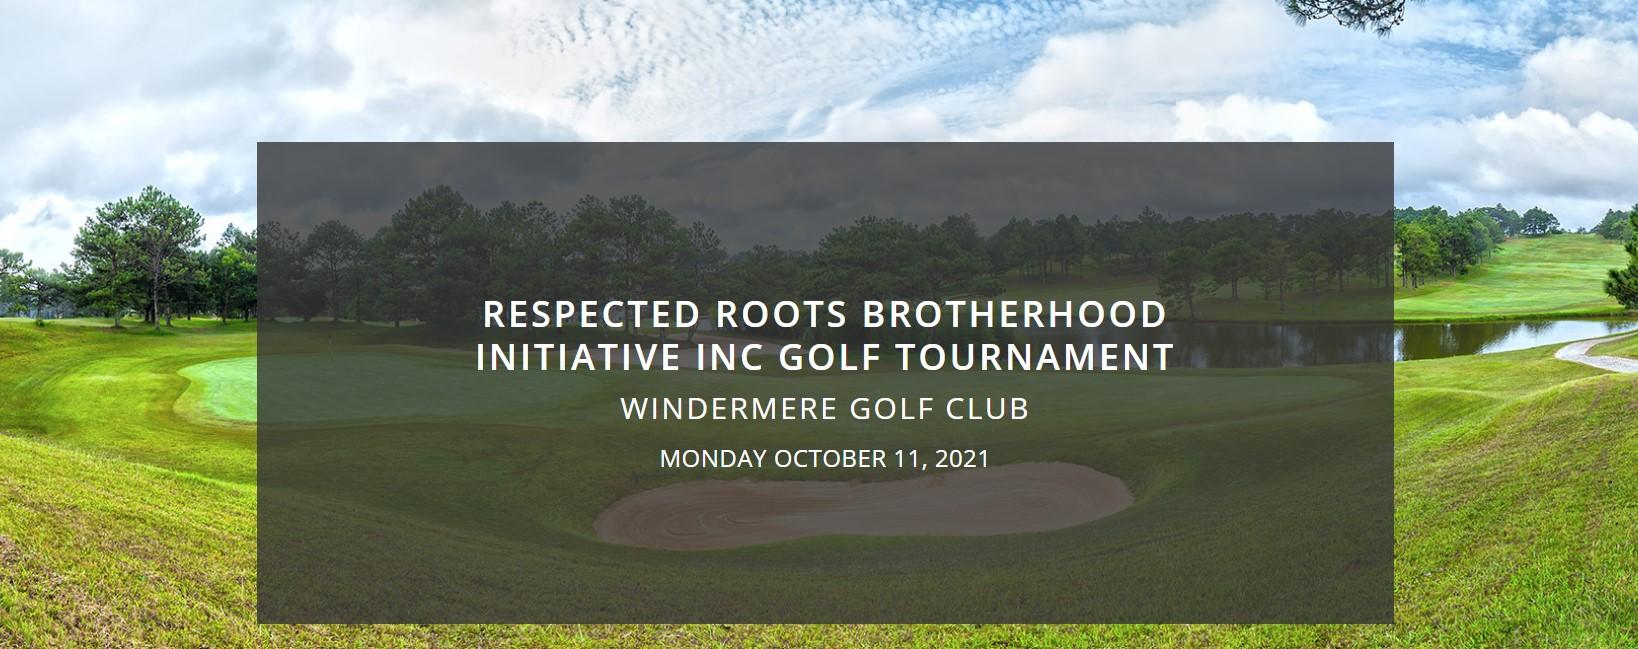 RESPECTED ROOTS BROTHERHOOD INITIATIVE CHARITY GOLF TOURNAMENT